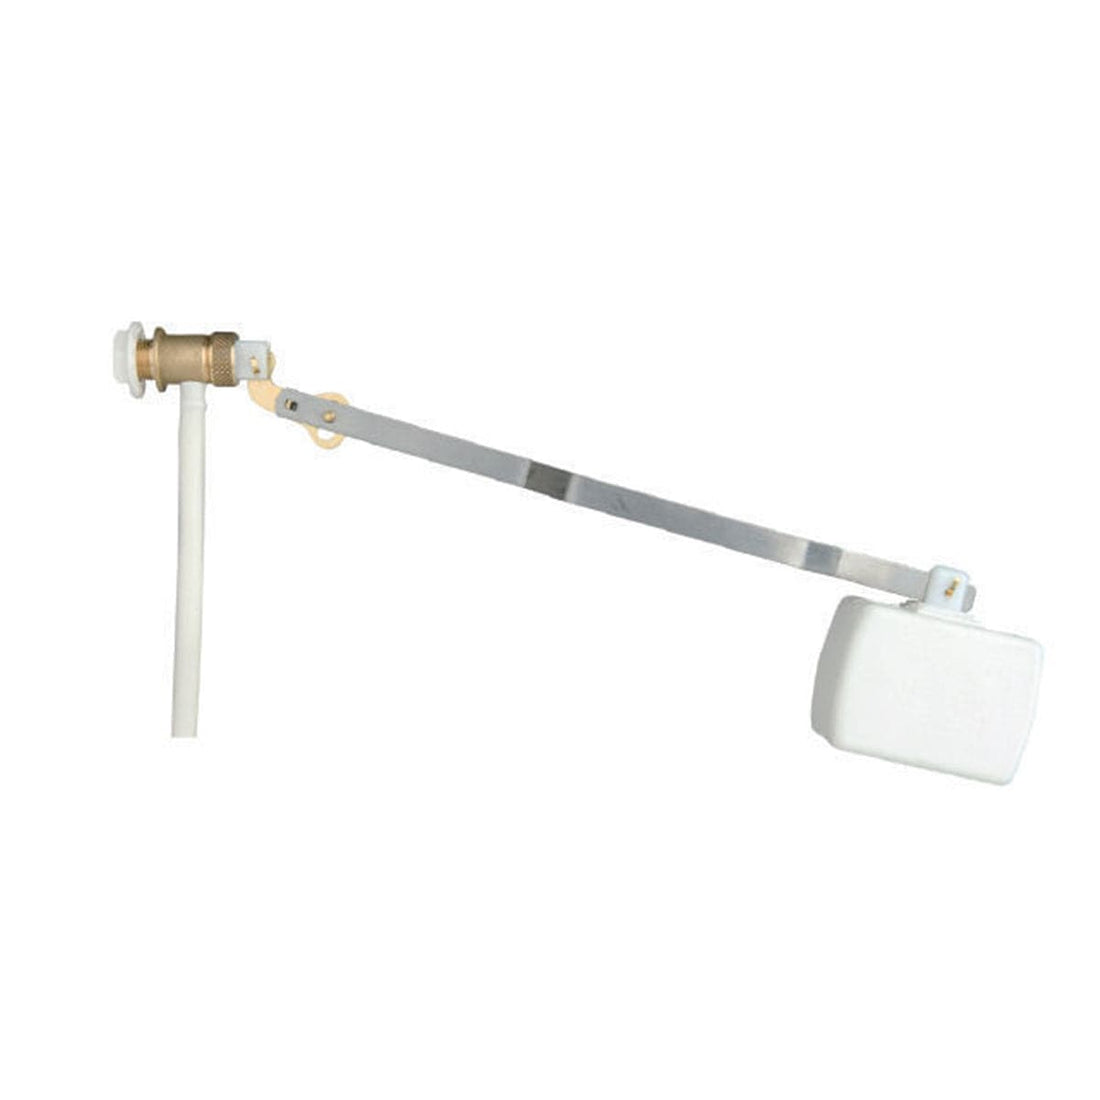 FLOATING TAP ASSEMBLY FOR TOILET CISTERN BRASS TAGO